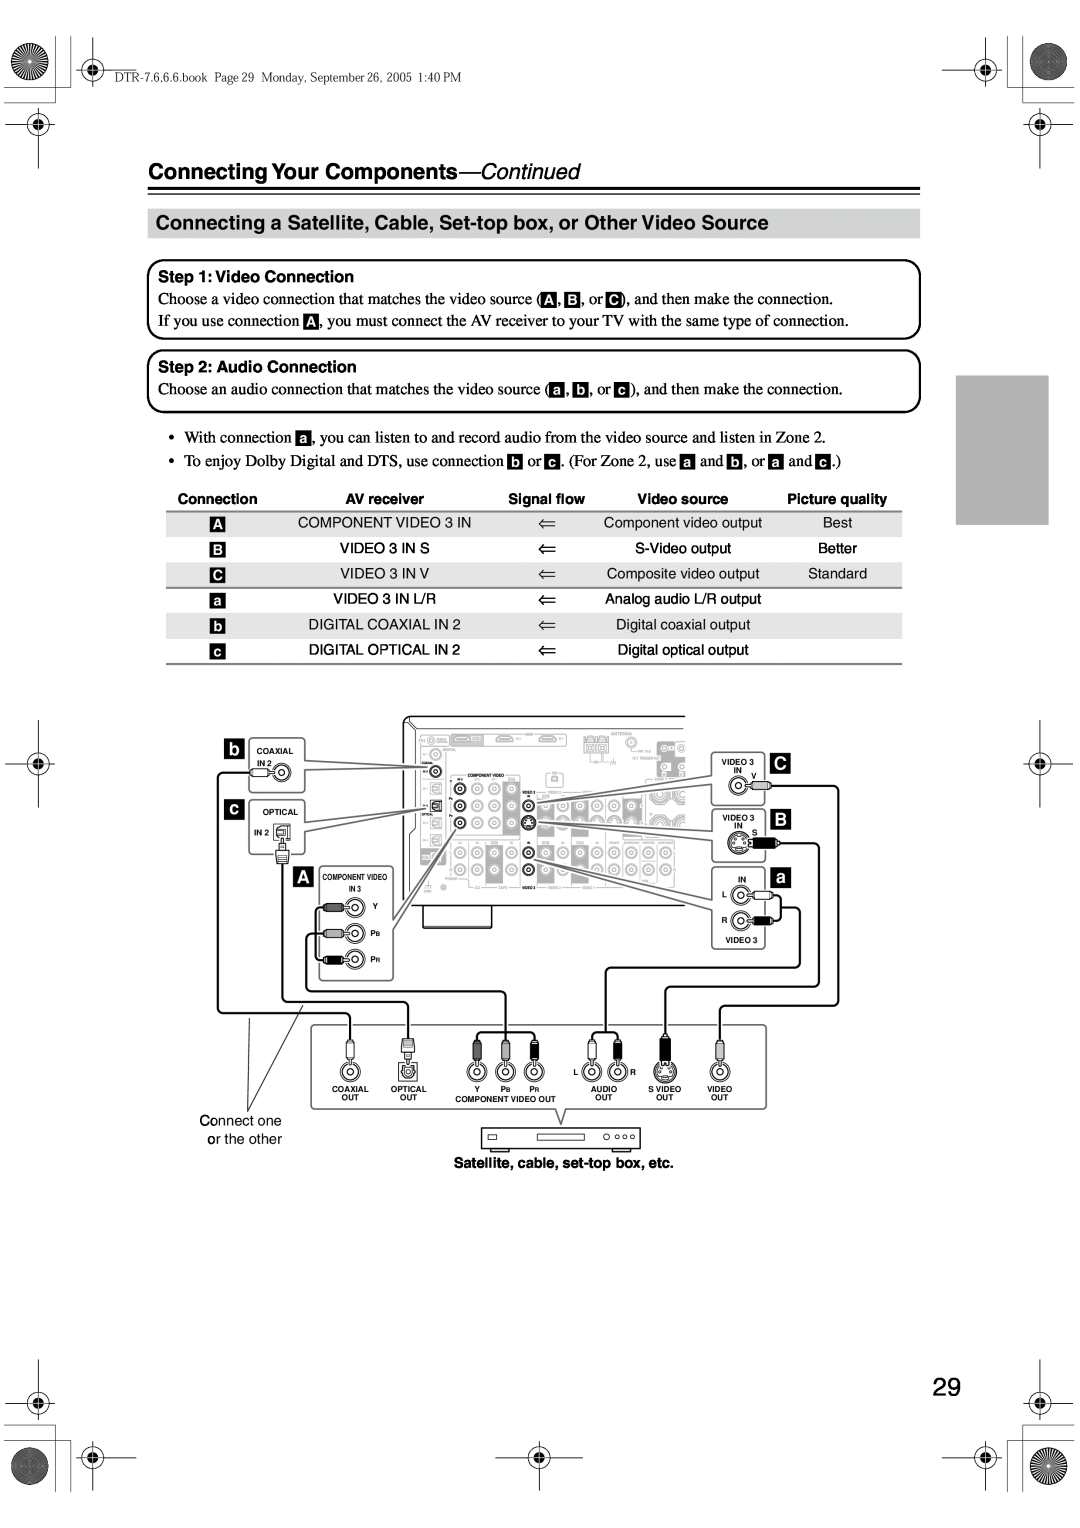 Integra DTR-7.6/6.6 instruction manual Connecting Your Components—Continued, C B a, Satellite, cable, set-topbox, etc 